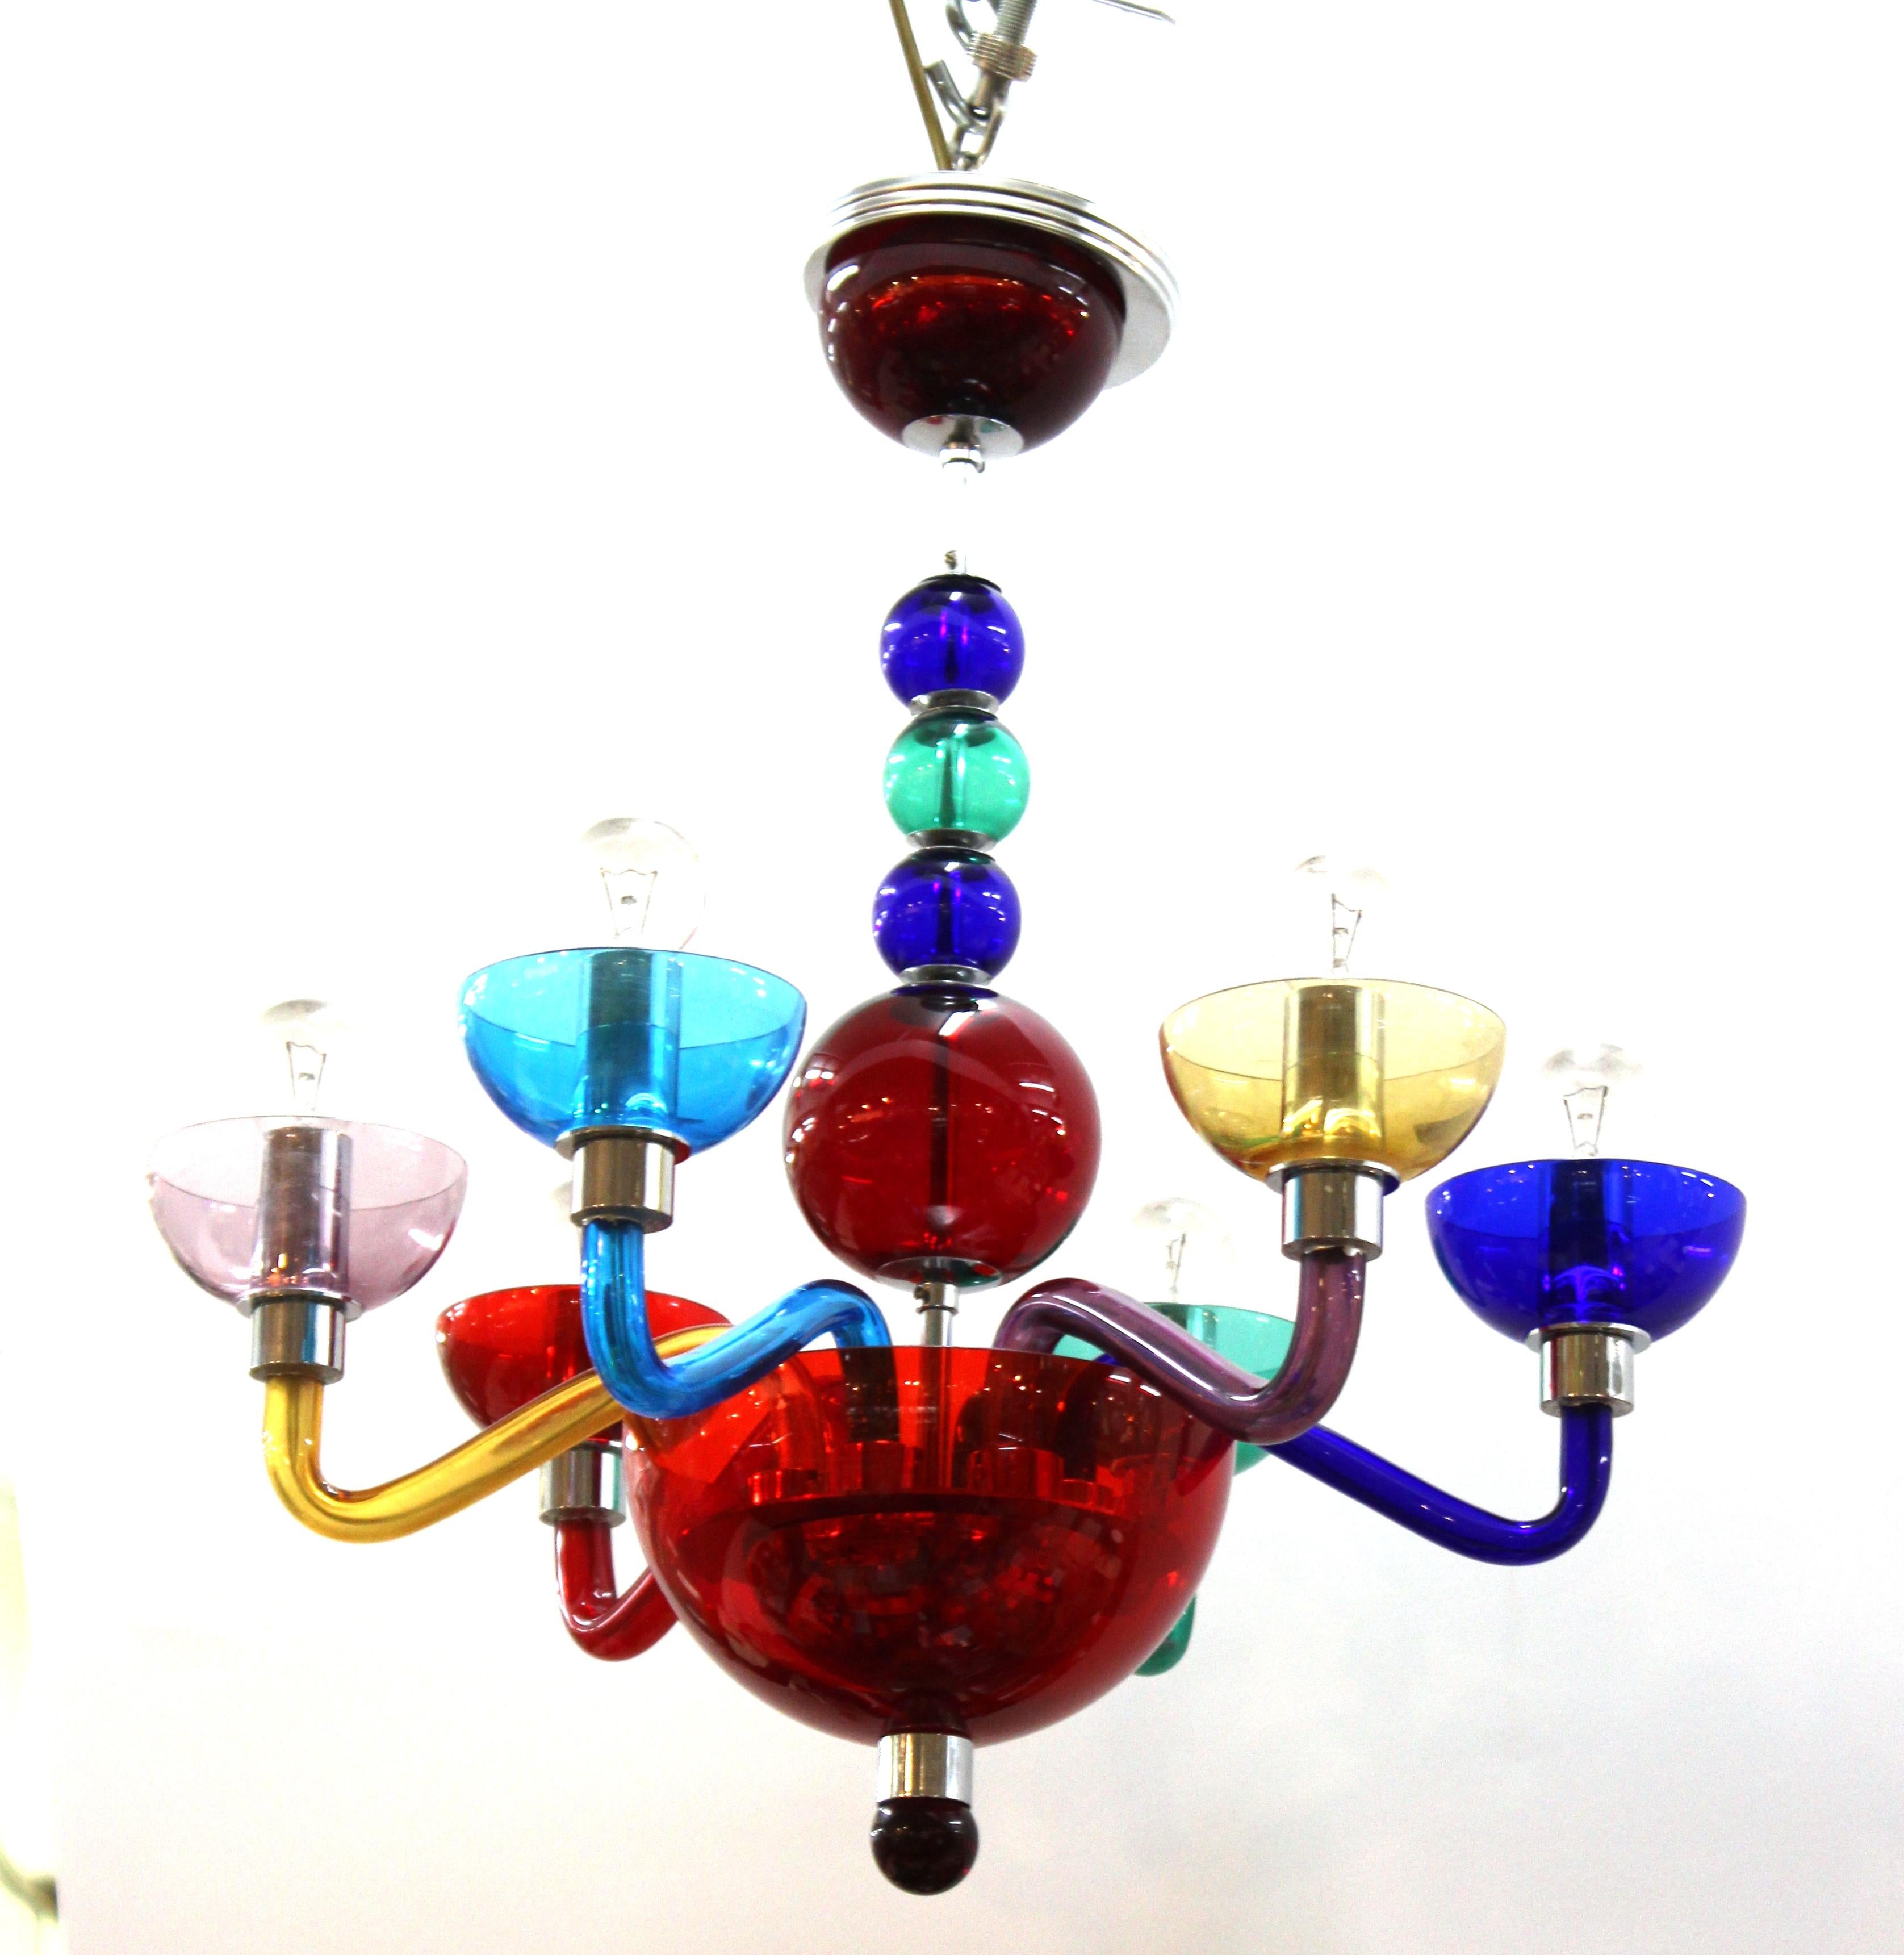 Italian modern multicolored Murano glass chandelier with six arms designed by Giovanni Cenedese, circa 1970s. The piece has its original label on the outer rim of the lower glass cup and an etched signature. Previous repair work on the lower part of